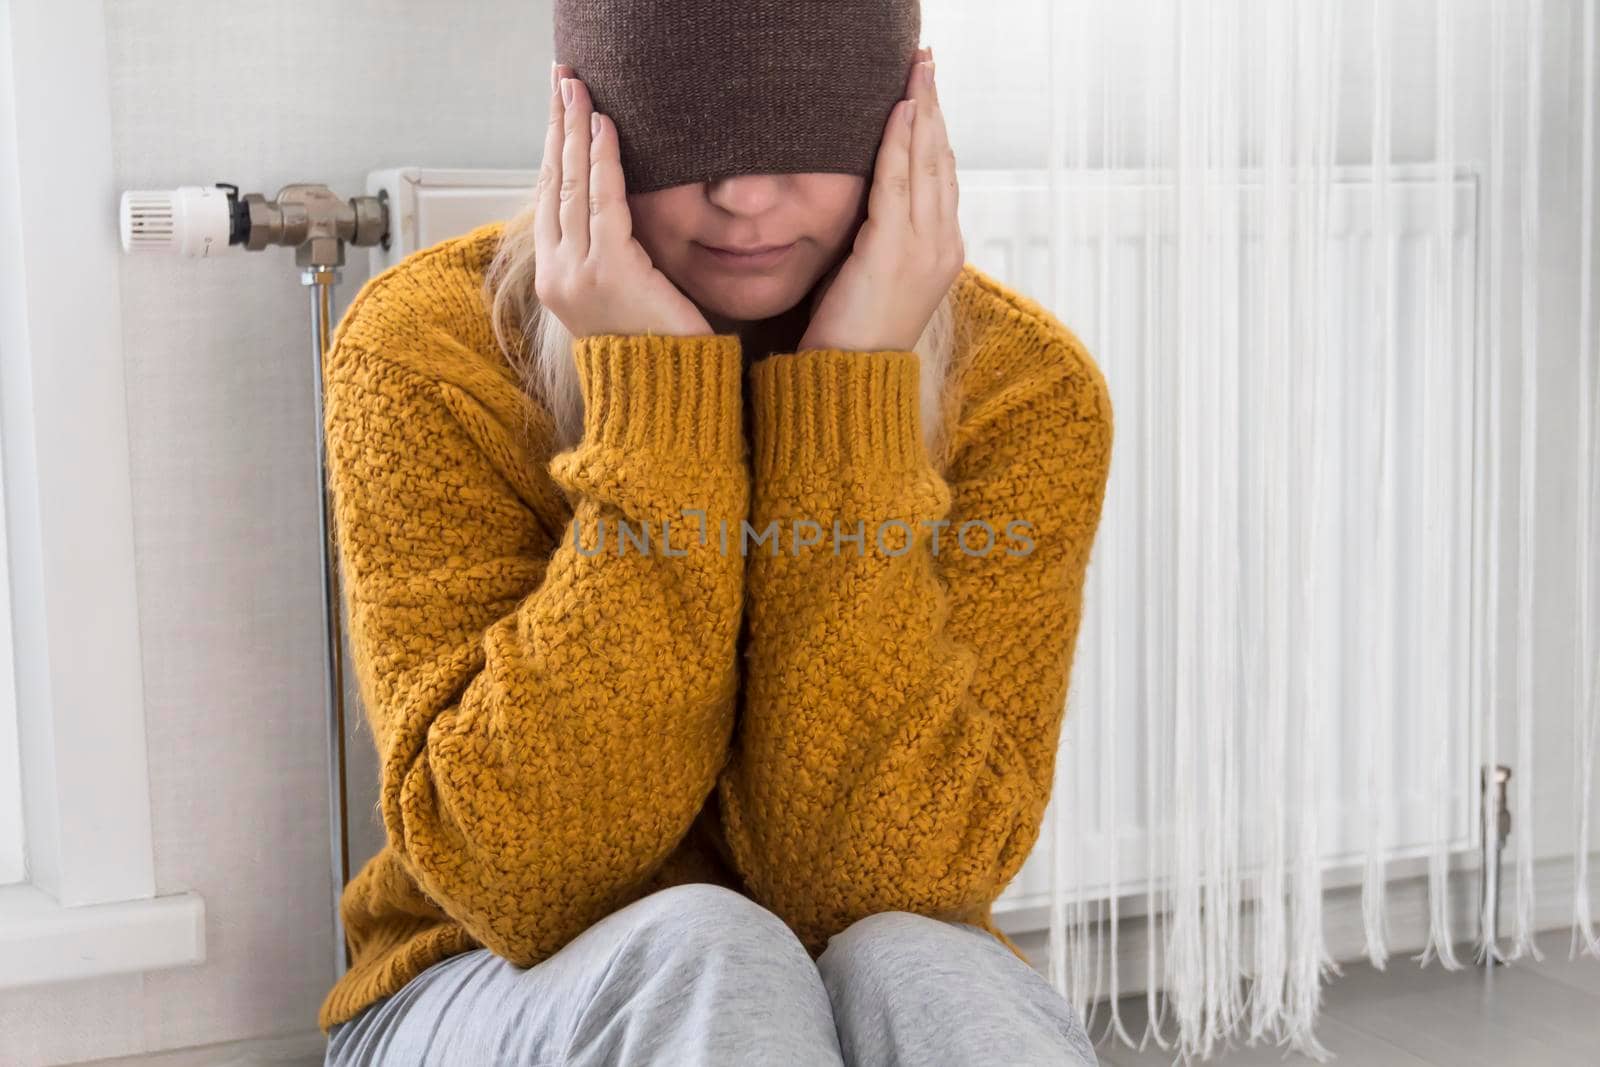 A young girl in a yellow sweater is sitting on the floor, pulling a brown hat over her face near a heater with a thermostat..